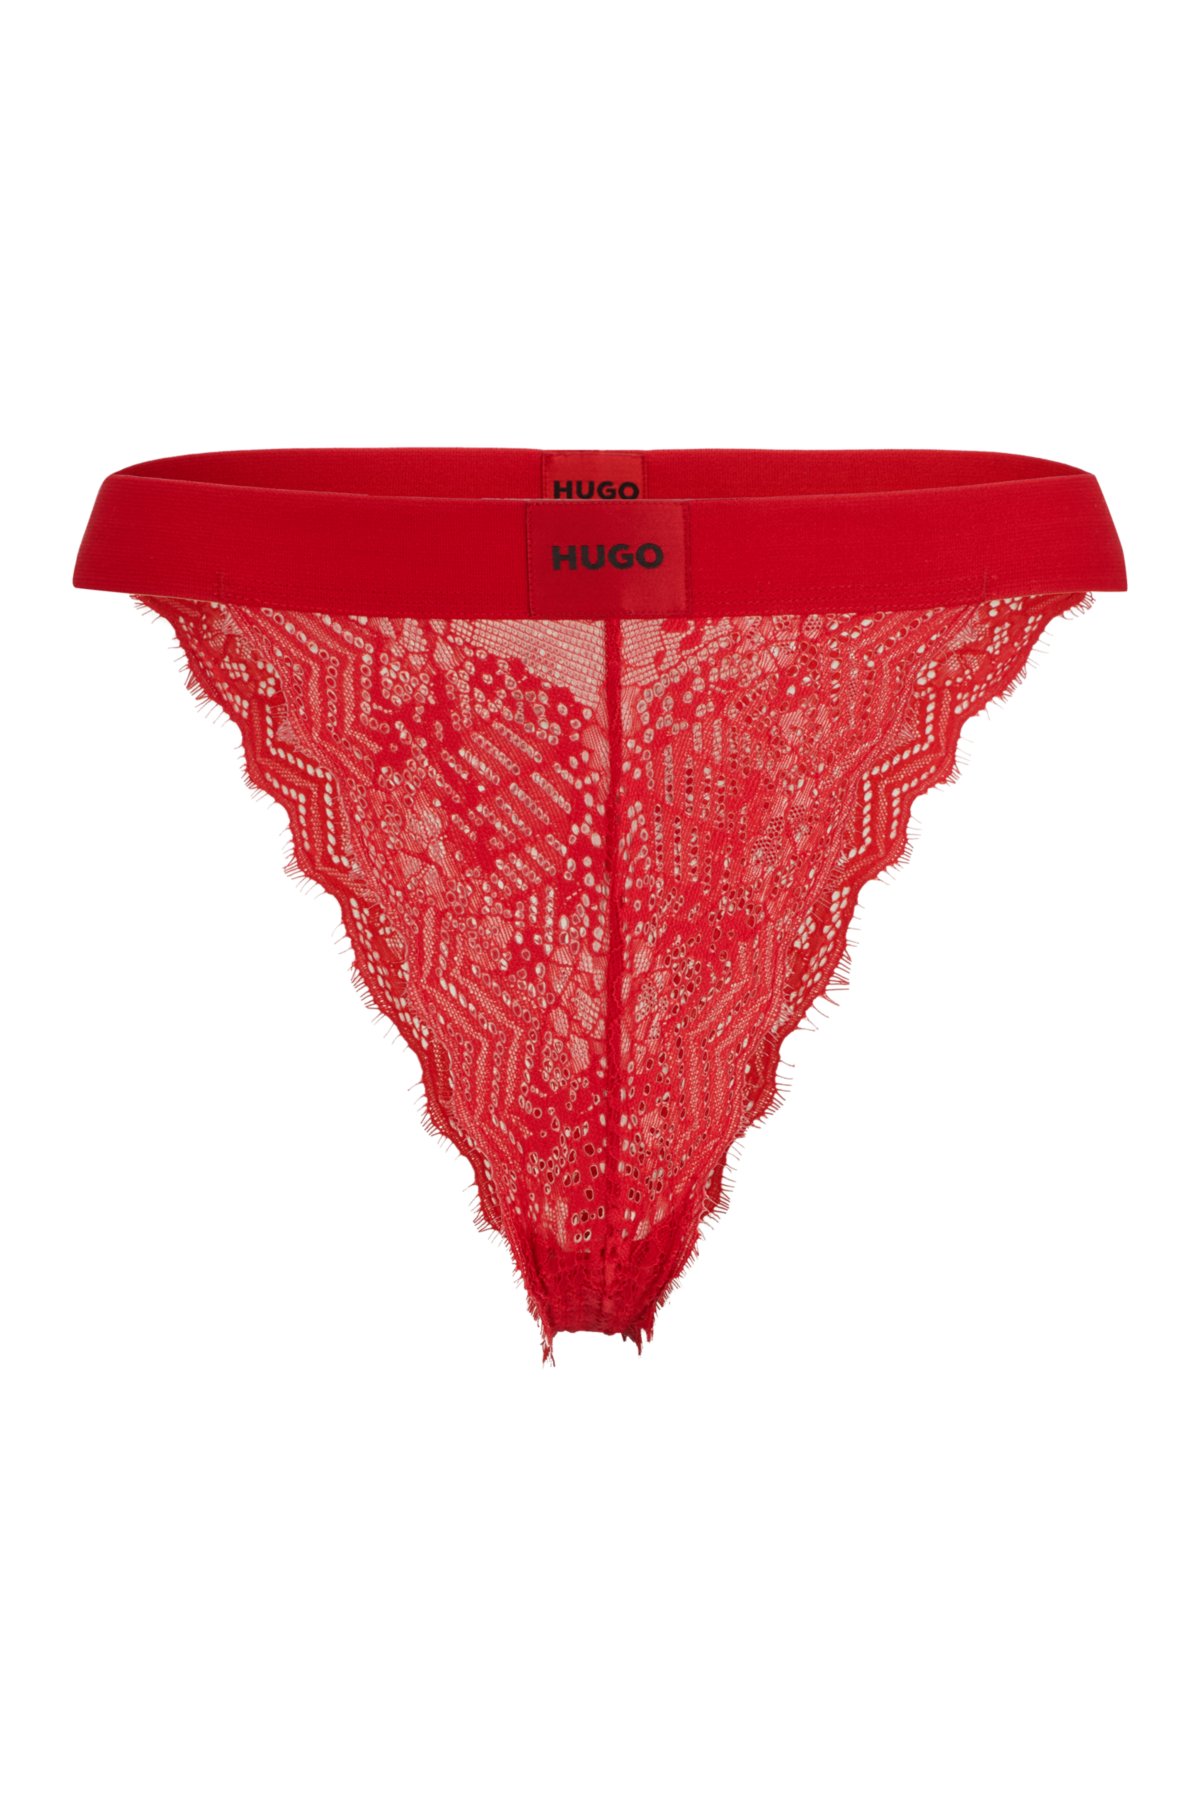 HUGO - Briefs in geometric lace with red logo label